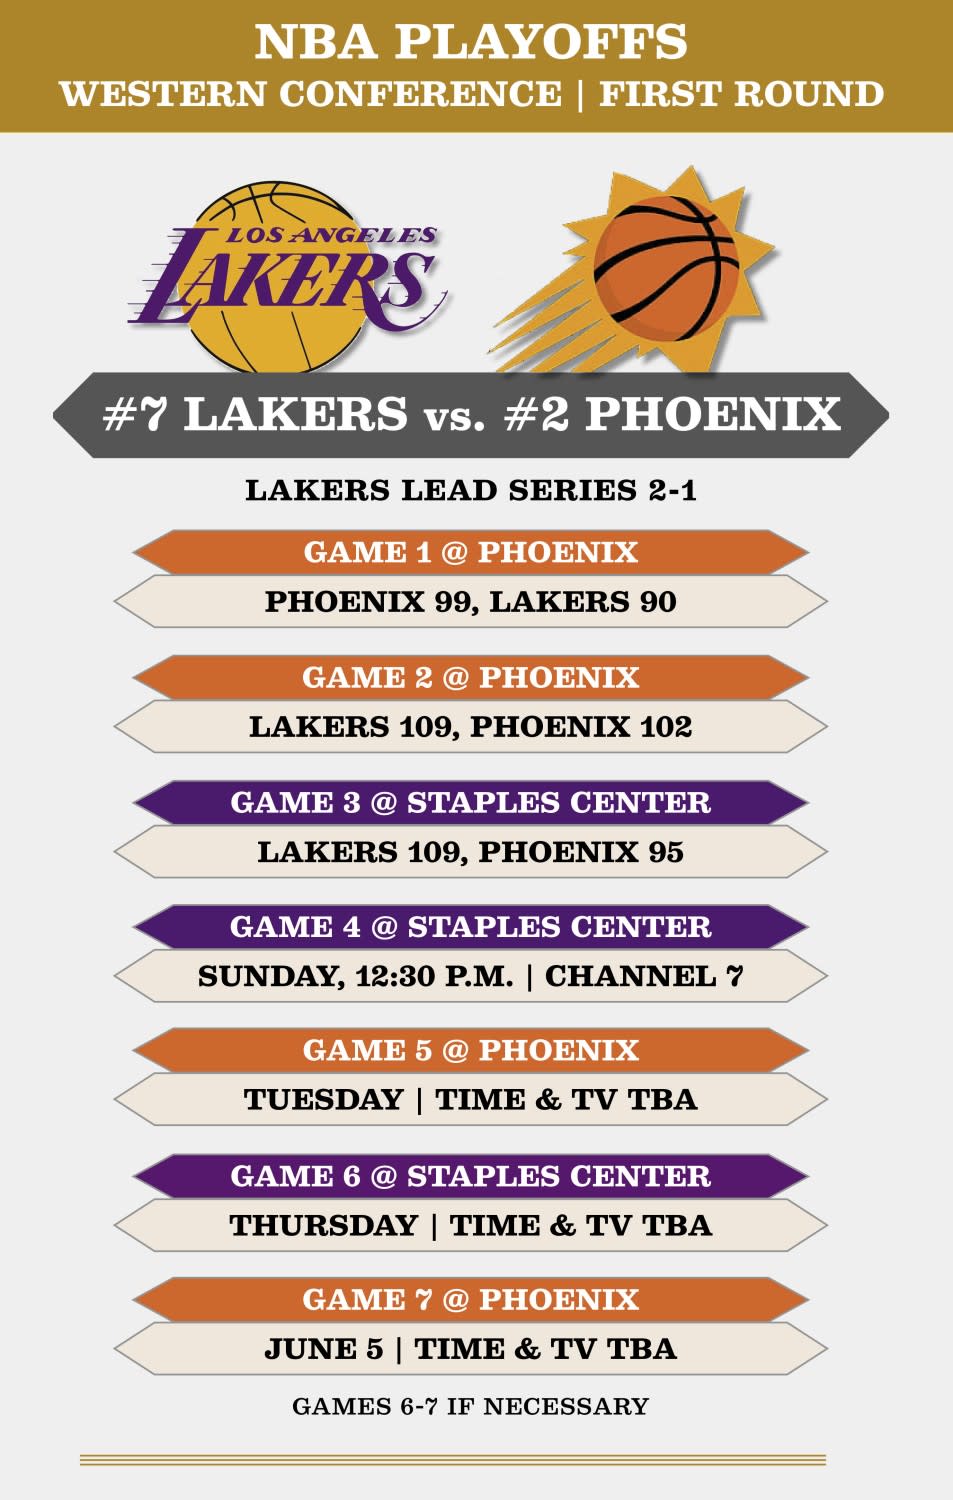 A graphic lists game times and TV stations for the Lakers and Suns.